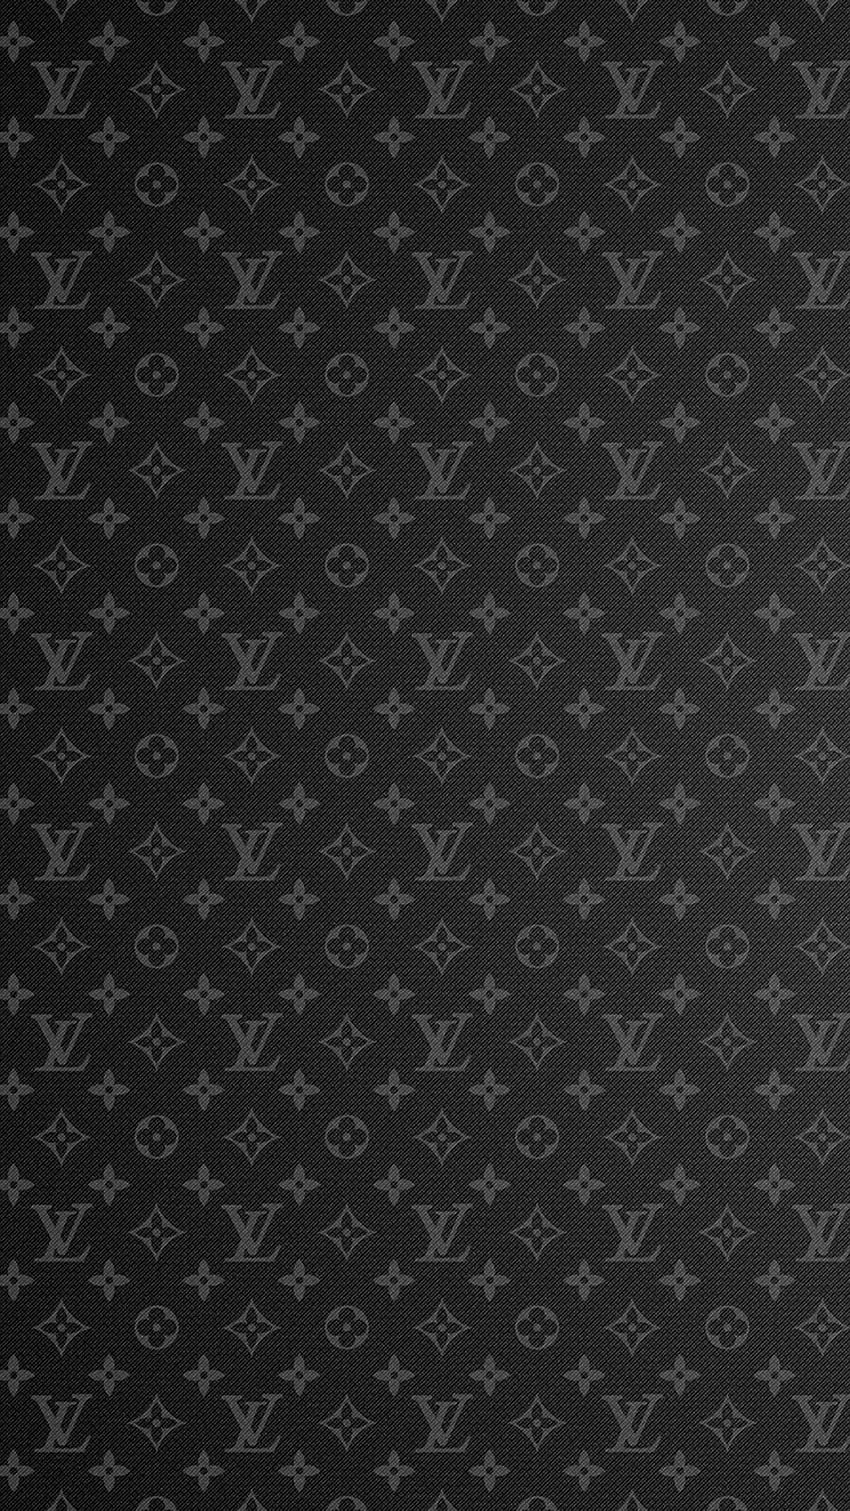 Smart Wallpapers Kenya - Louis Vuitton themed wallpaper 🔥 What you love to  see 💯 Call/Whatsapp 0736693598 Cost 2400 inclusive of installation # wallpapers #nairobifashion #3dwallpaper